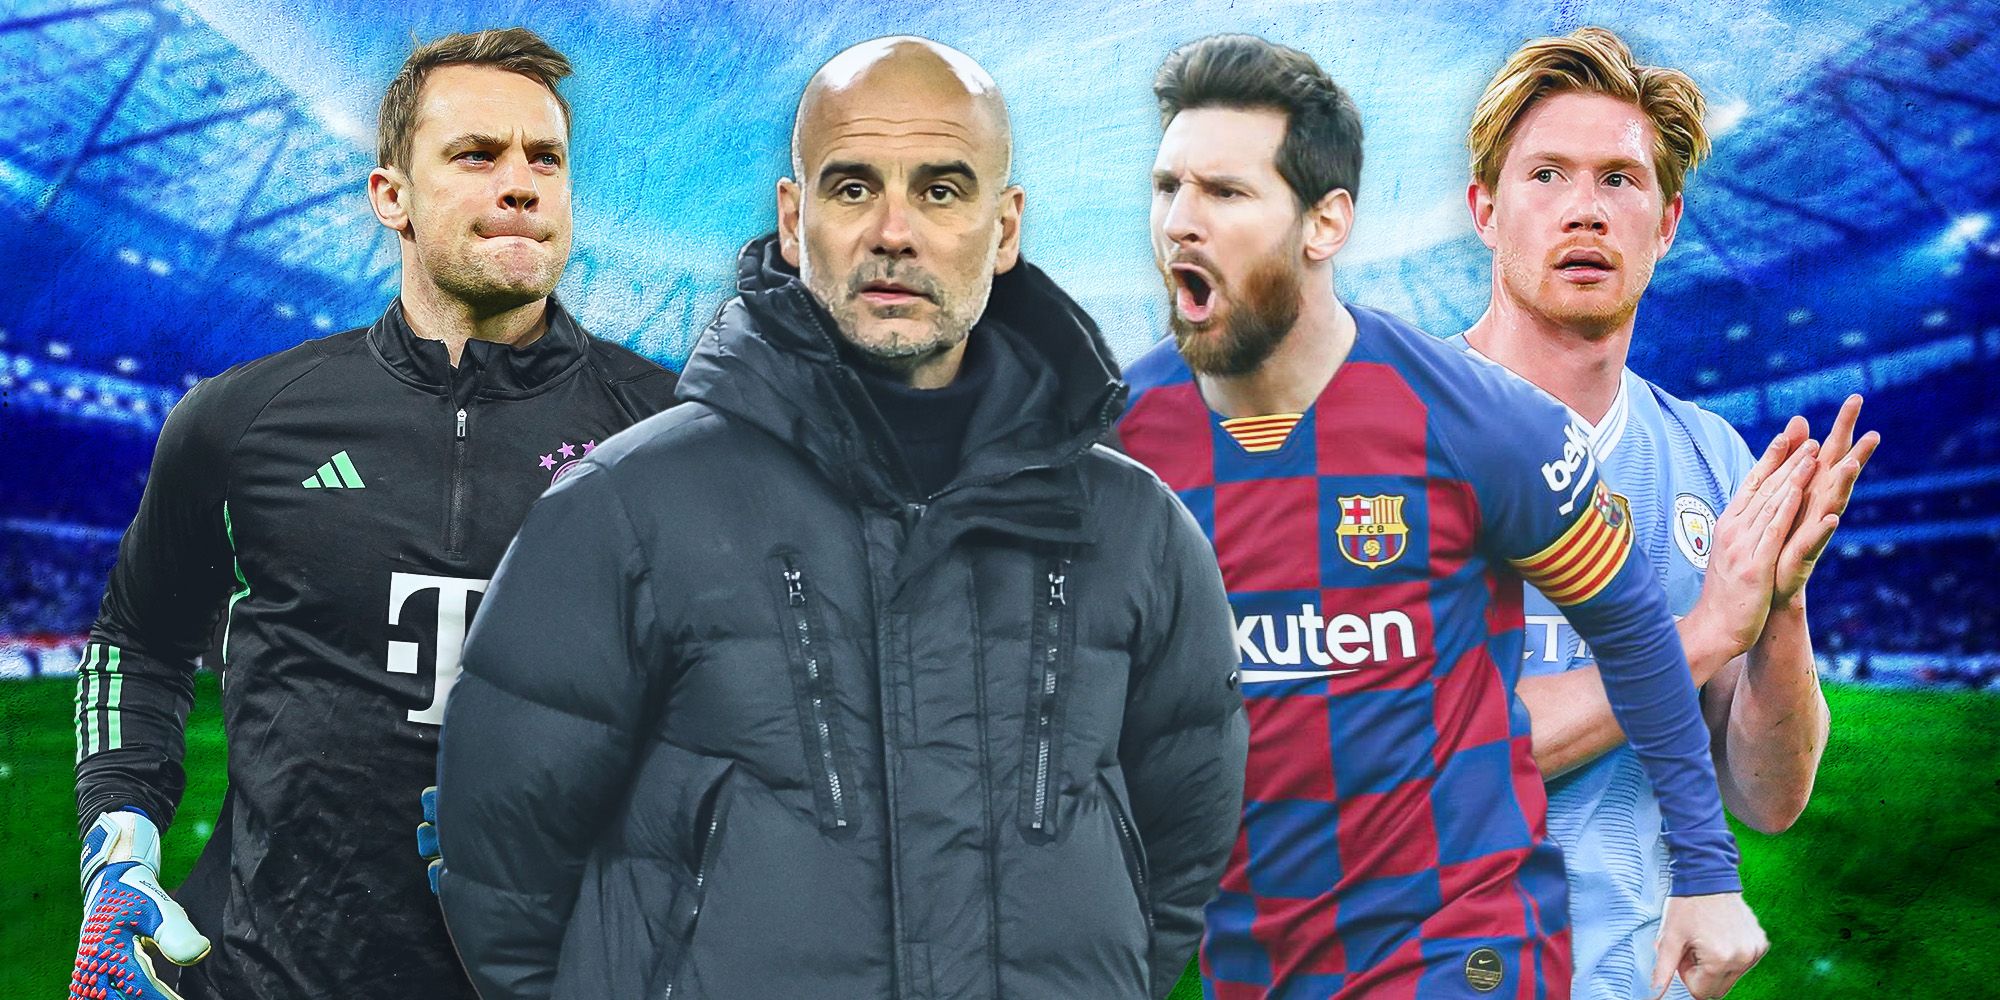 Pep Guardiola's ultimate combined 11 of players he managed